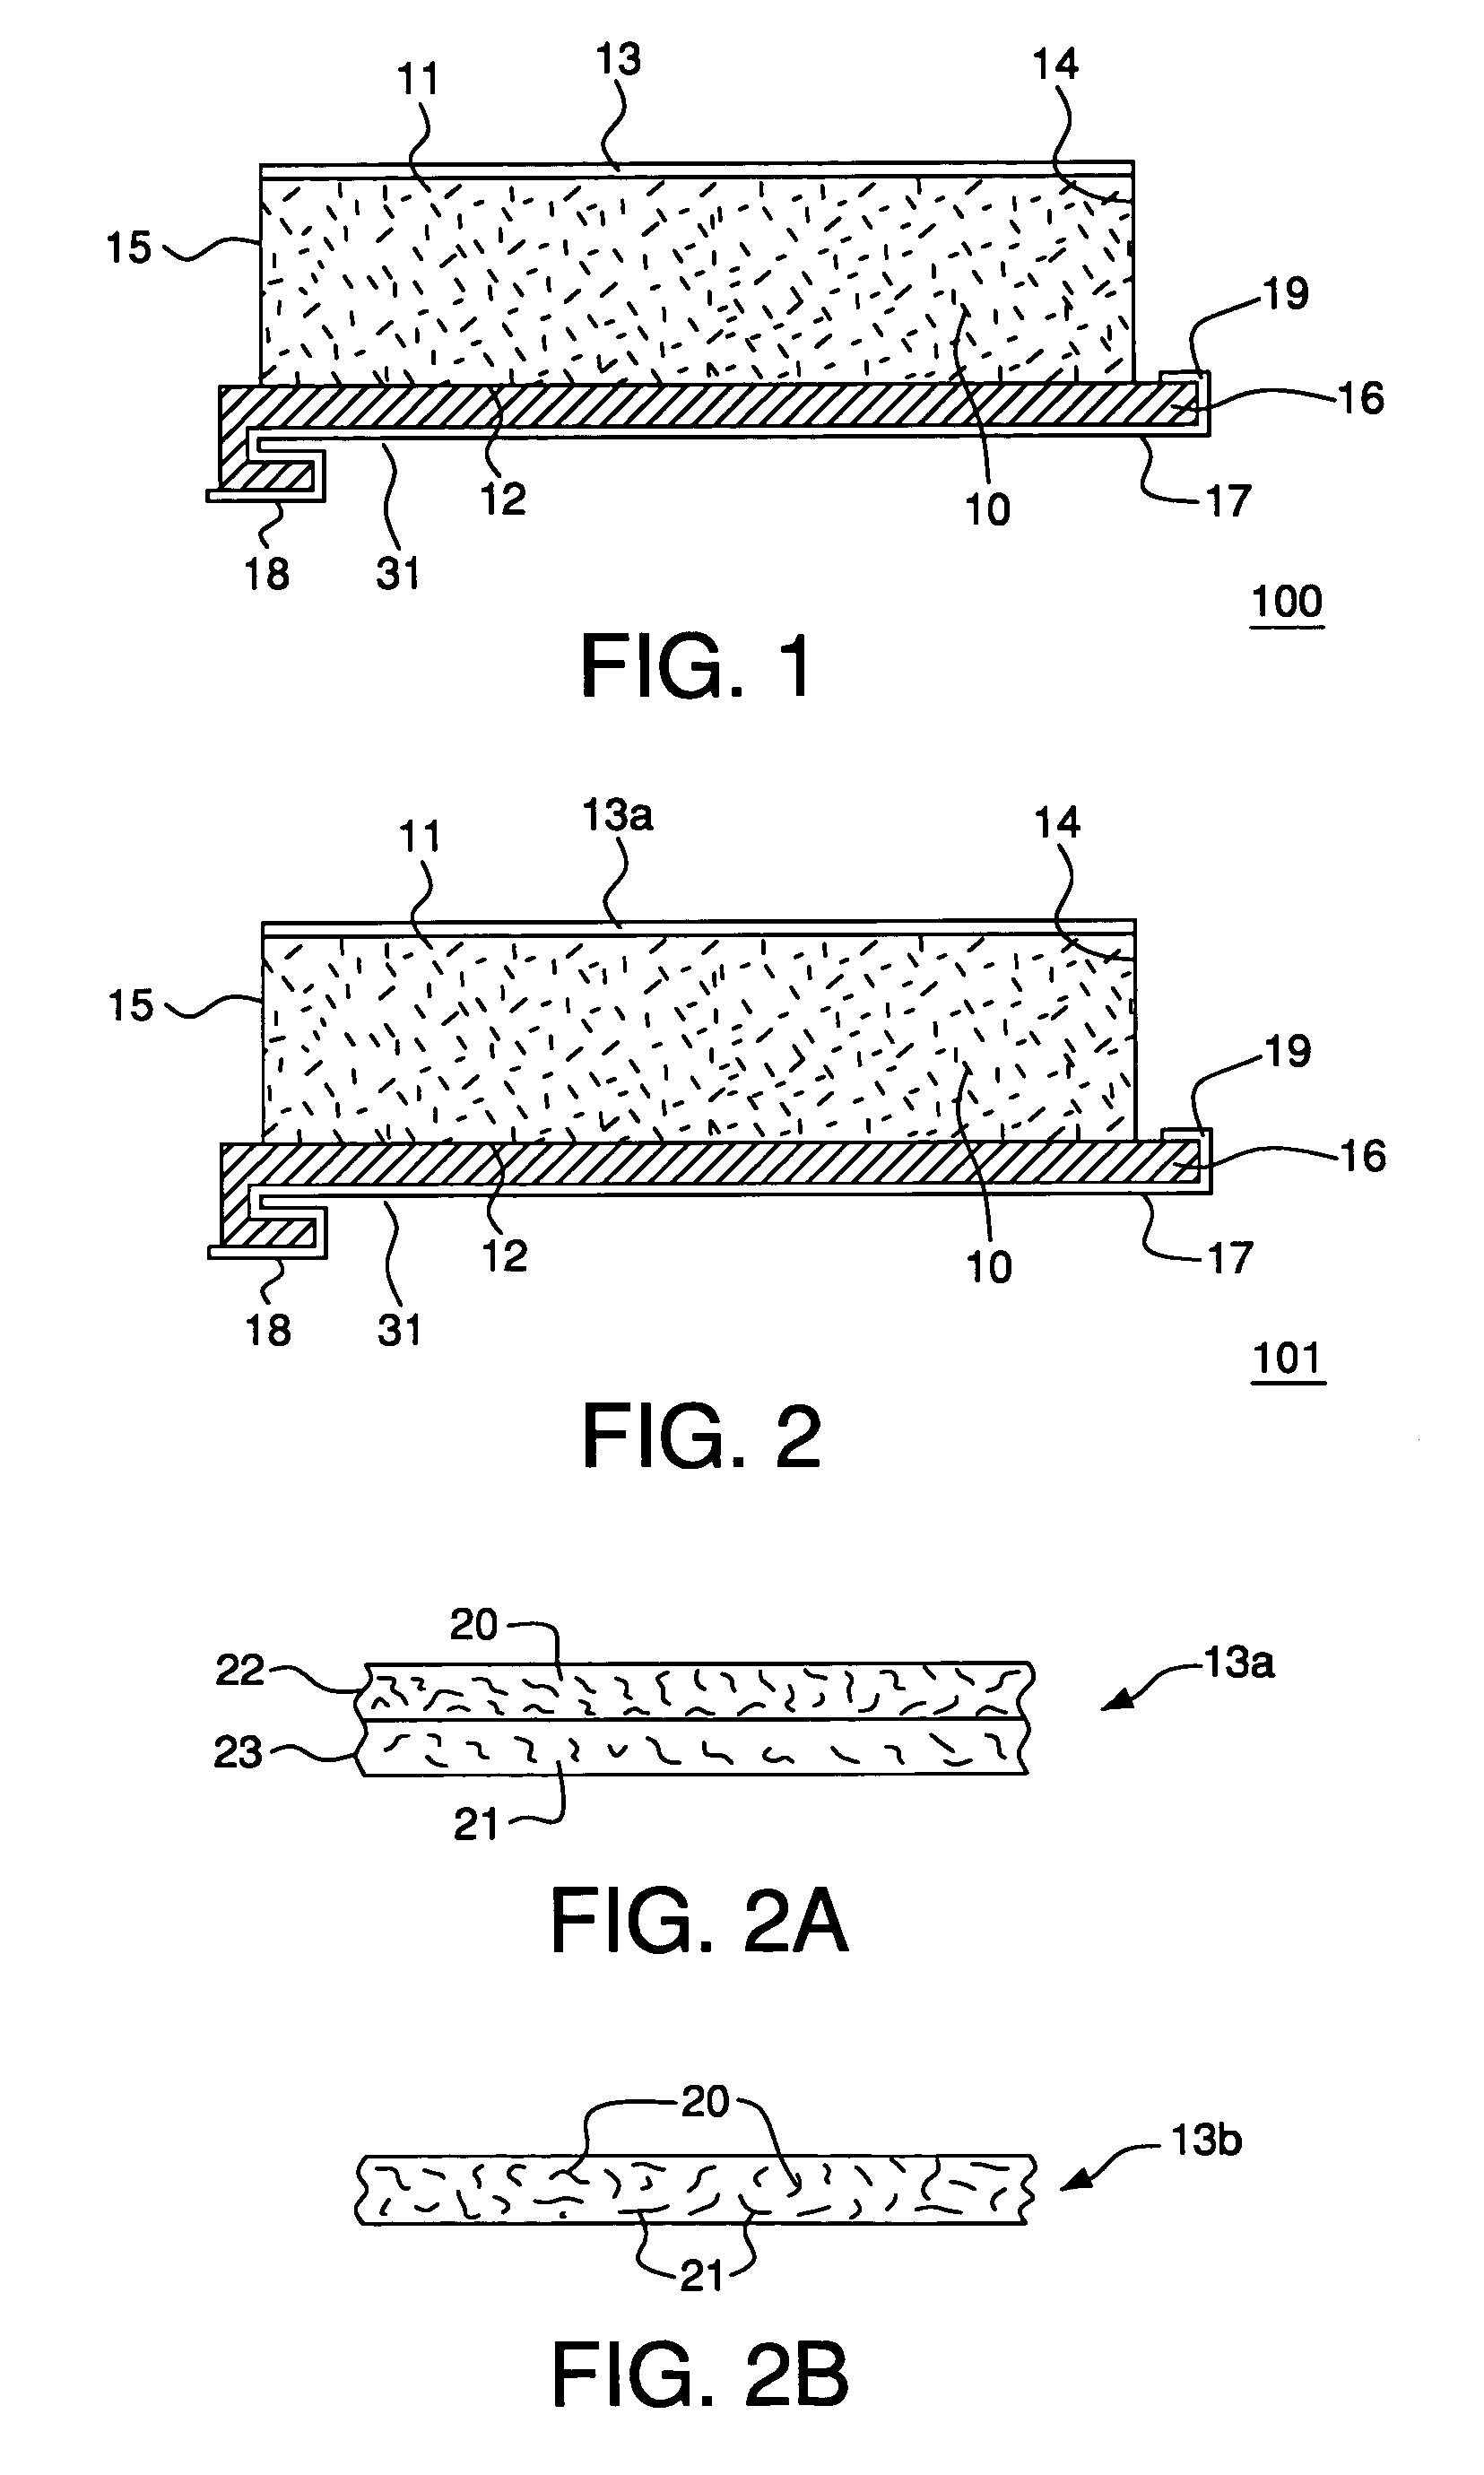 Reinforced fibrous insulation product and method of reinforcing same